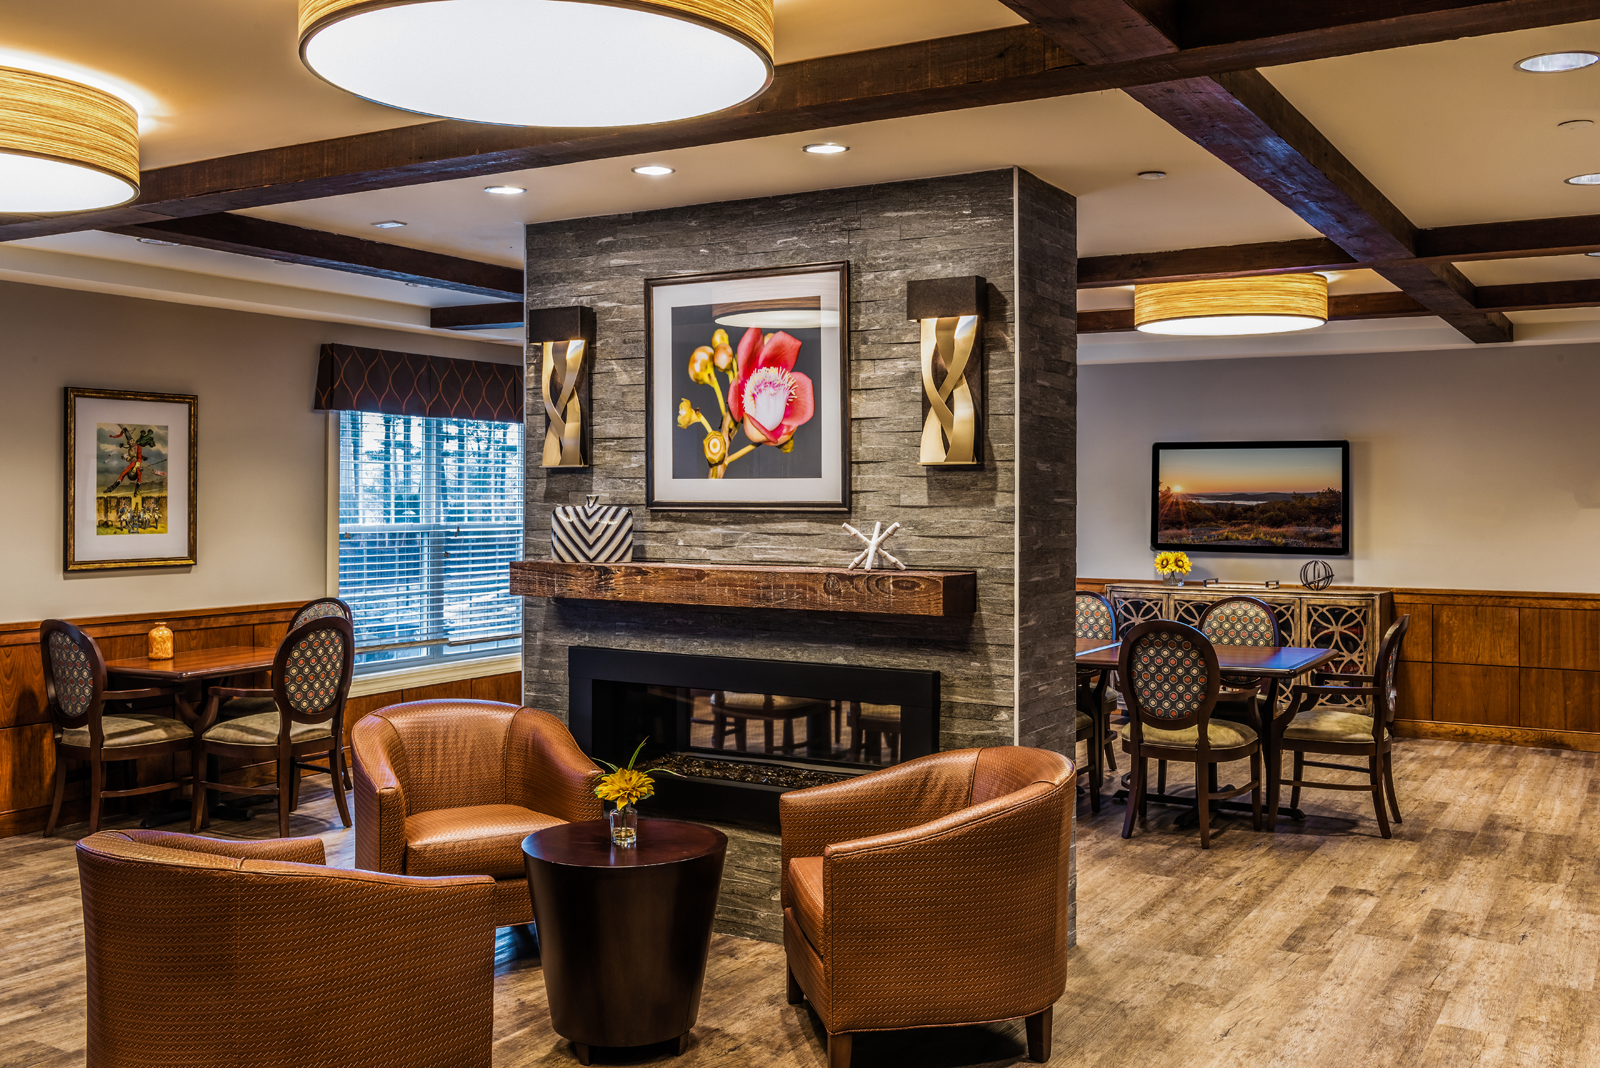 A fireplace brings the cozy to this rustic interior design of the social meeting area of an assisted living community .